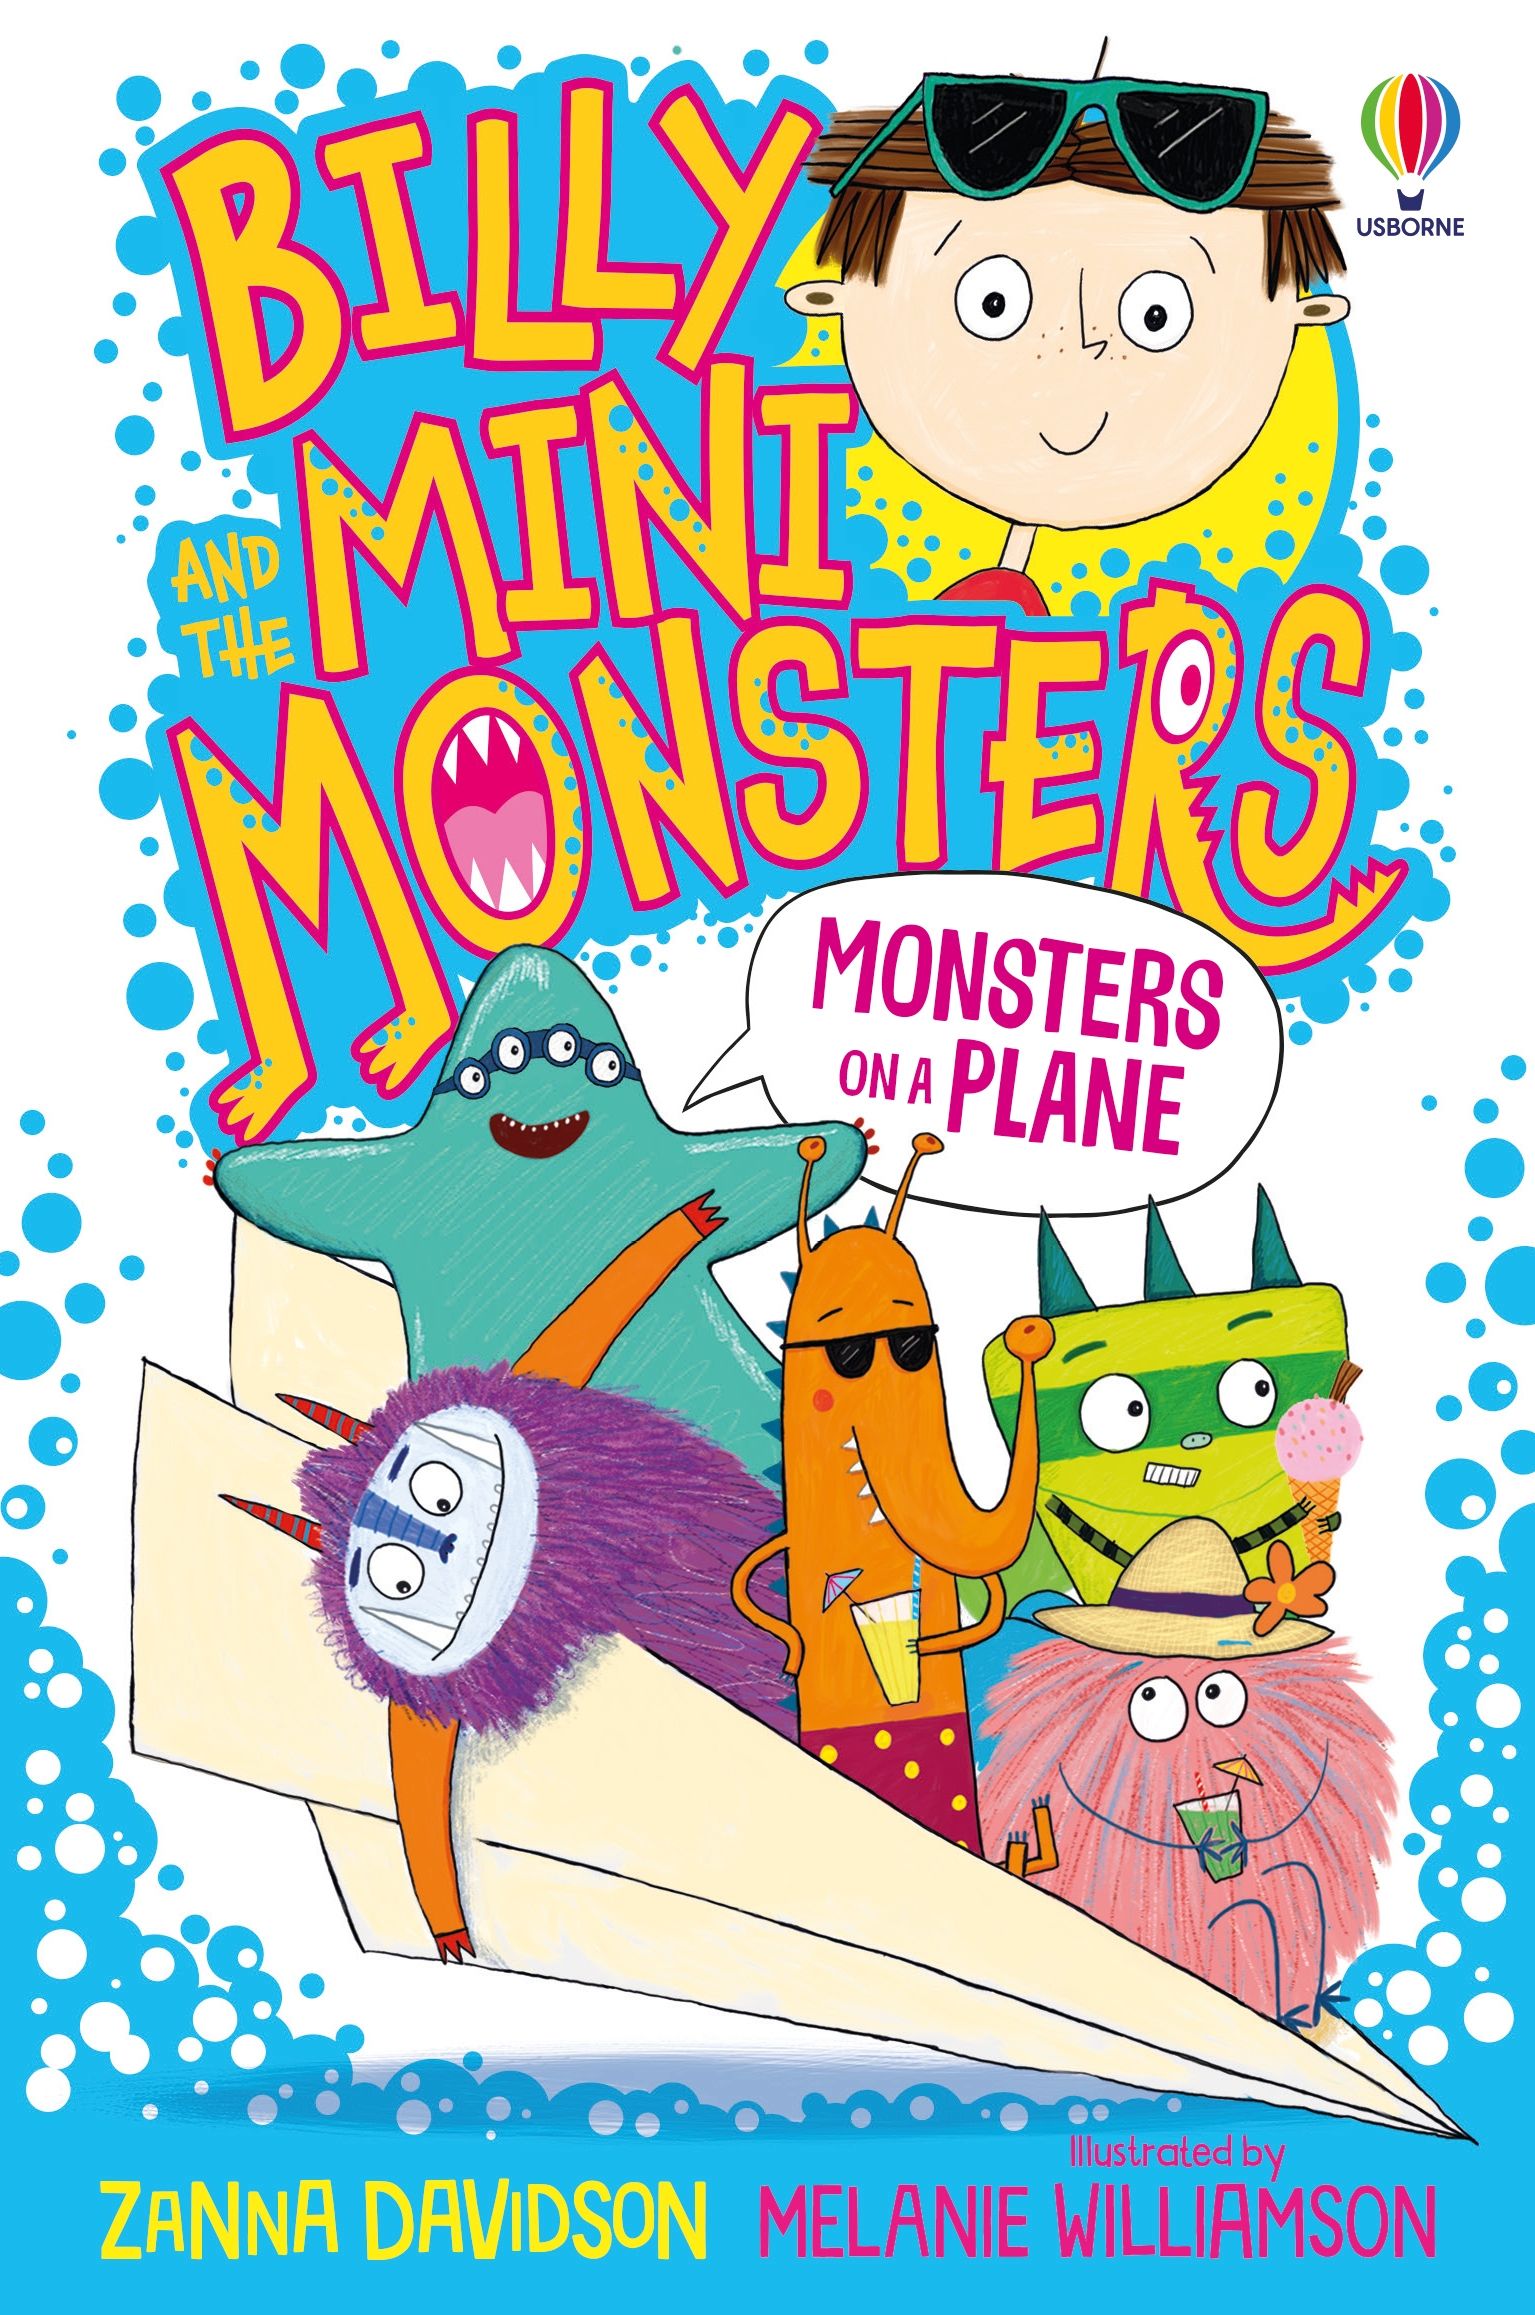 Billy and the Mini Monsters (3 Books) (8411673624793)